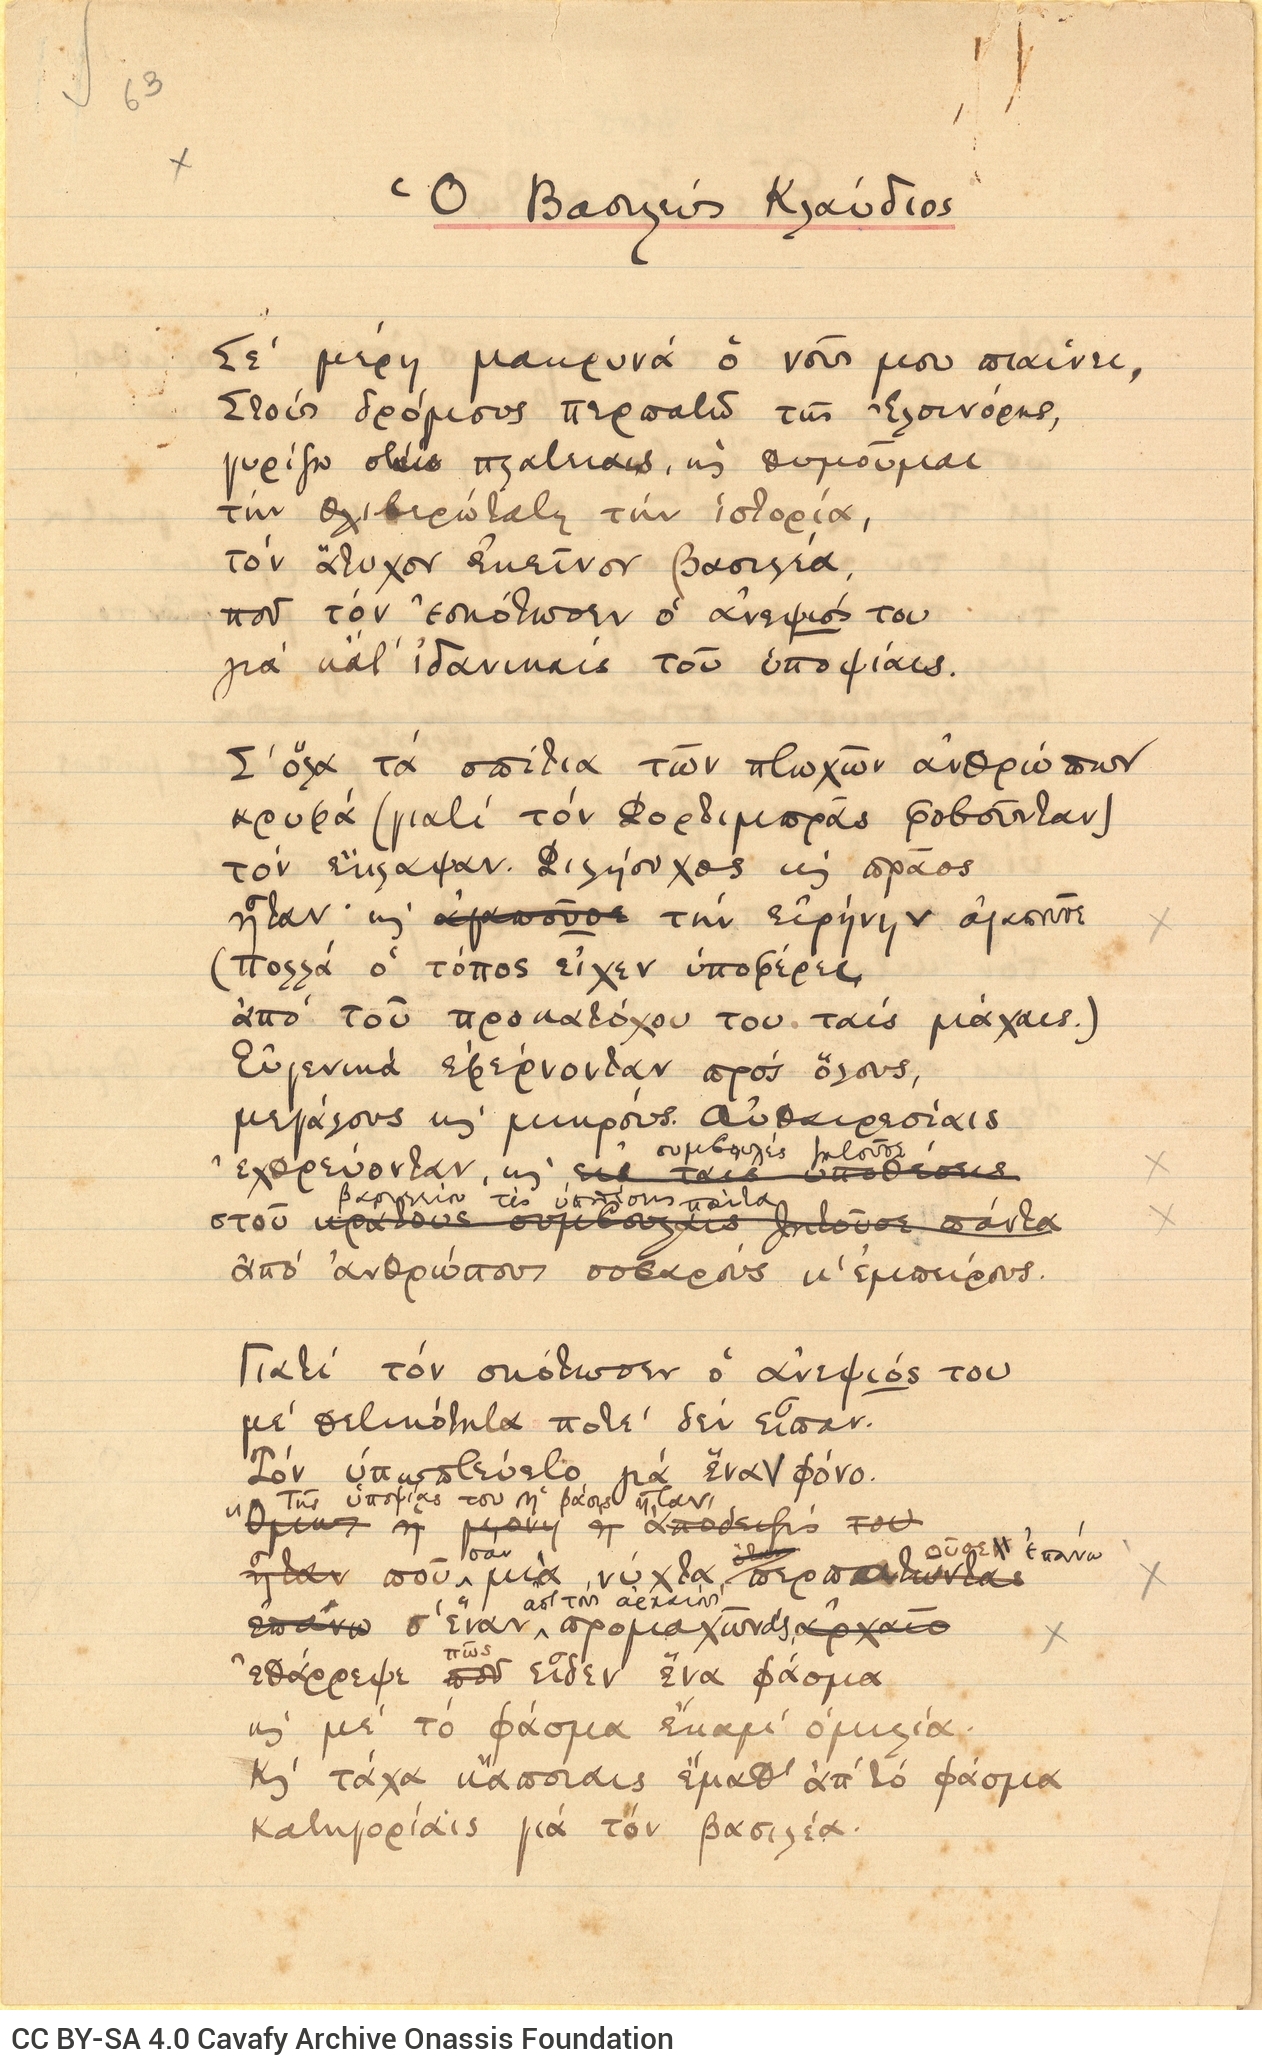 Manuscripts of poems on a double sheet notepaper and attached typewritten note. In the last three pages, the poem "King Claud